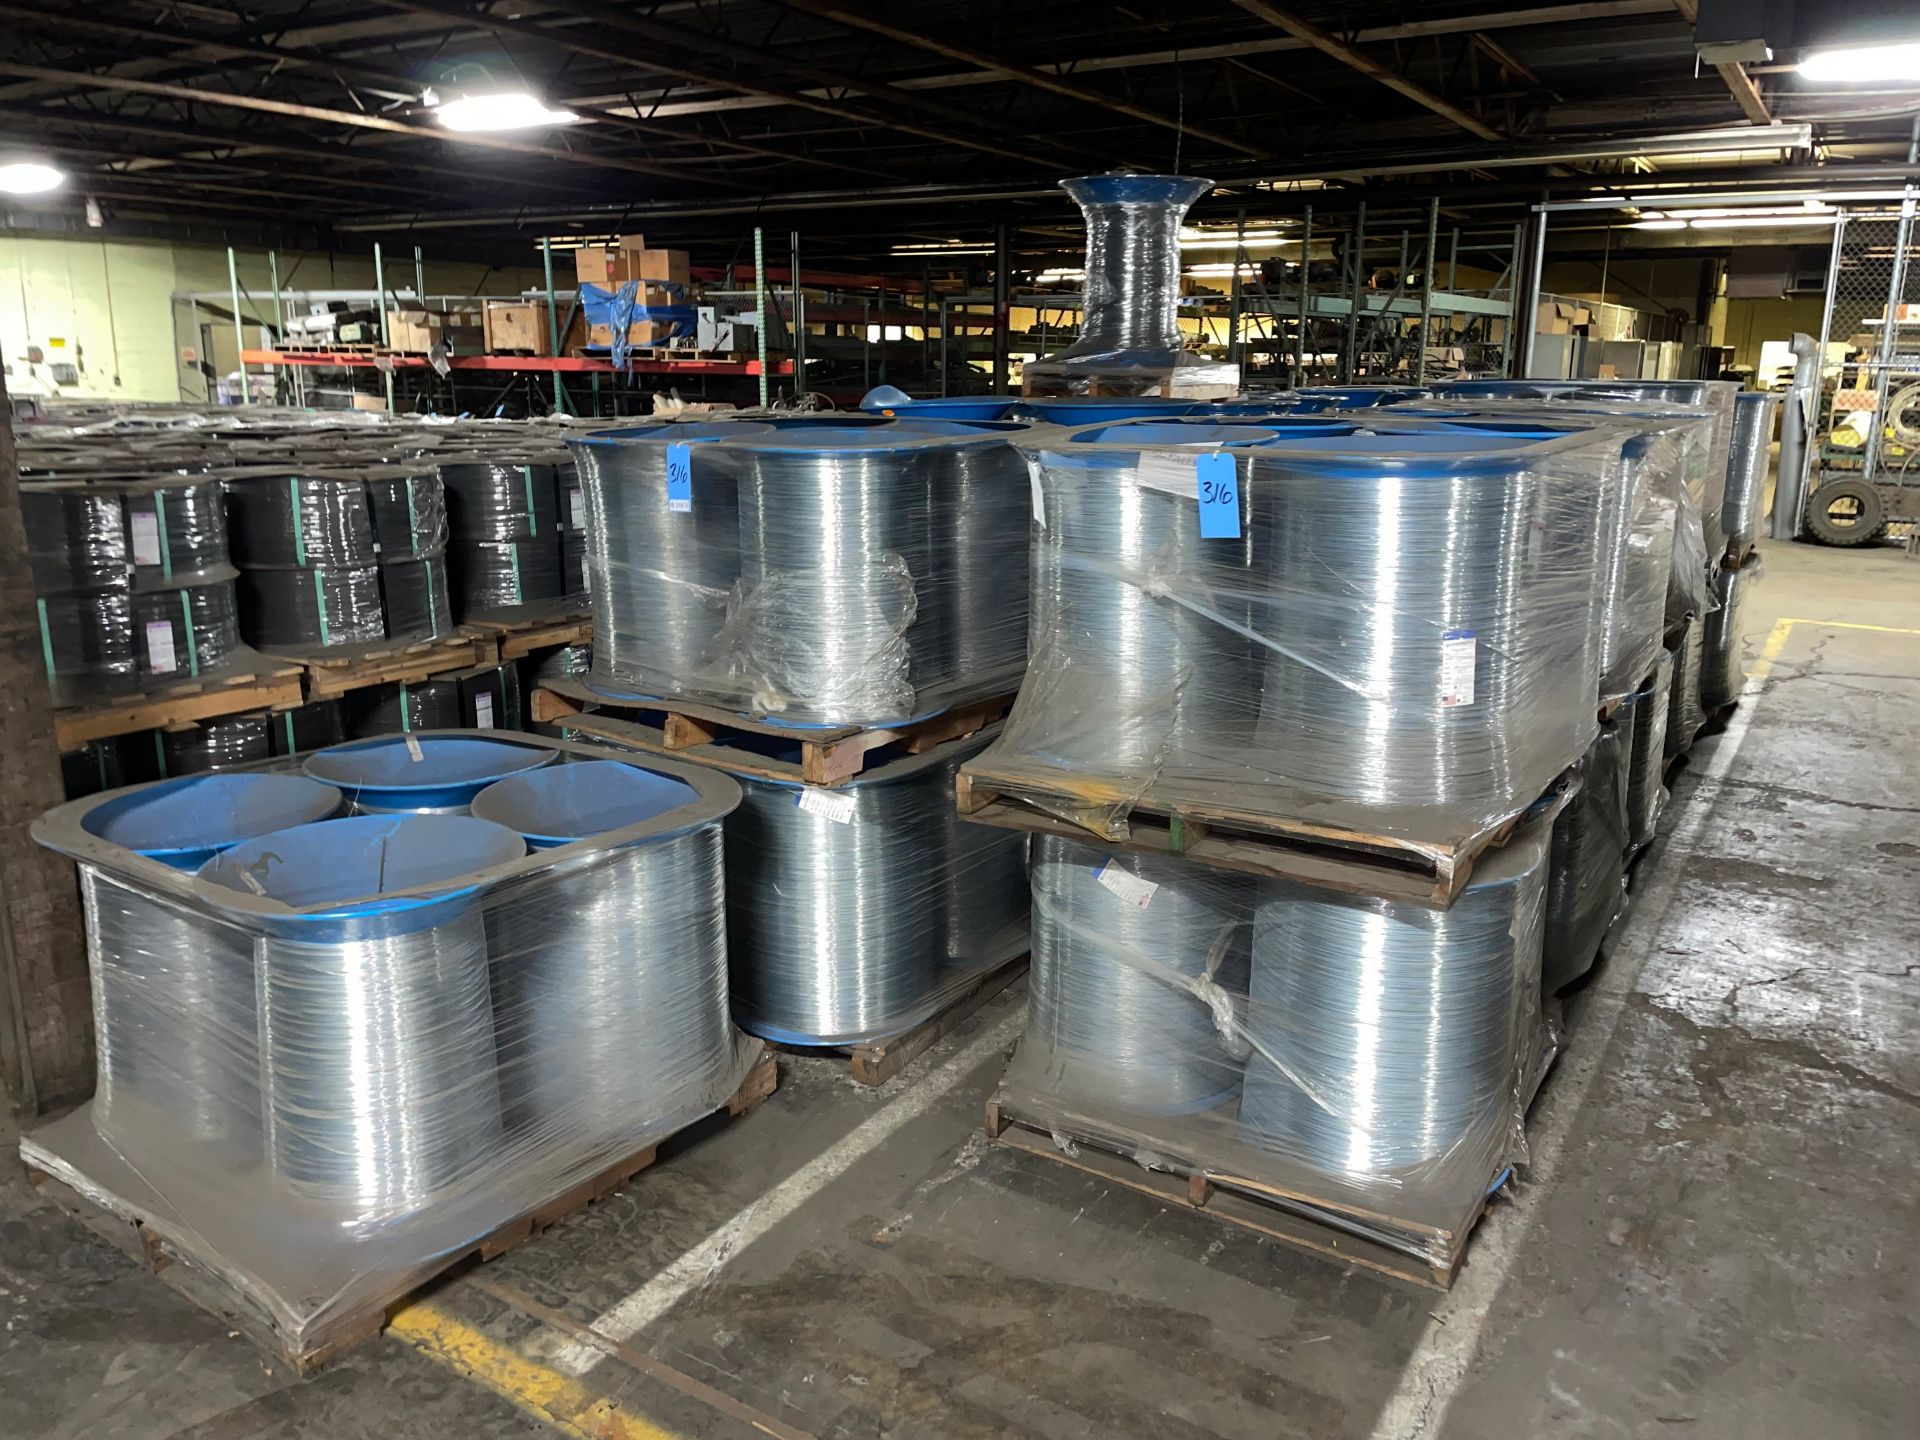 Appoximately (36) Pallets of .0378 Coated Galvanized Carbon Steel, Weighs approximately 55,000Lbs - Image 6 of 6